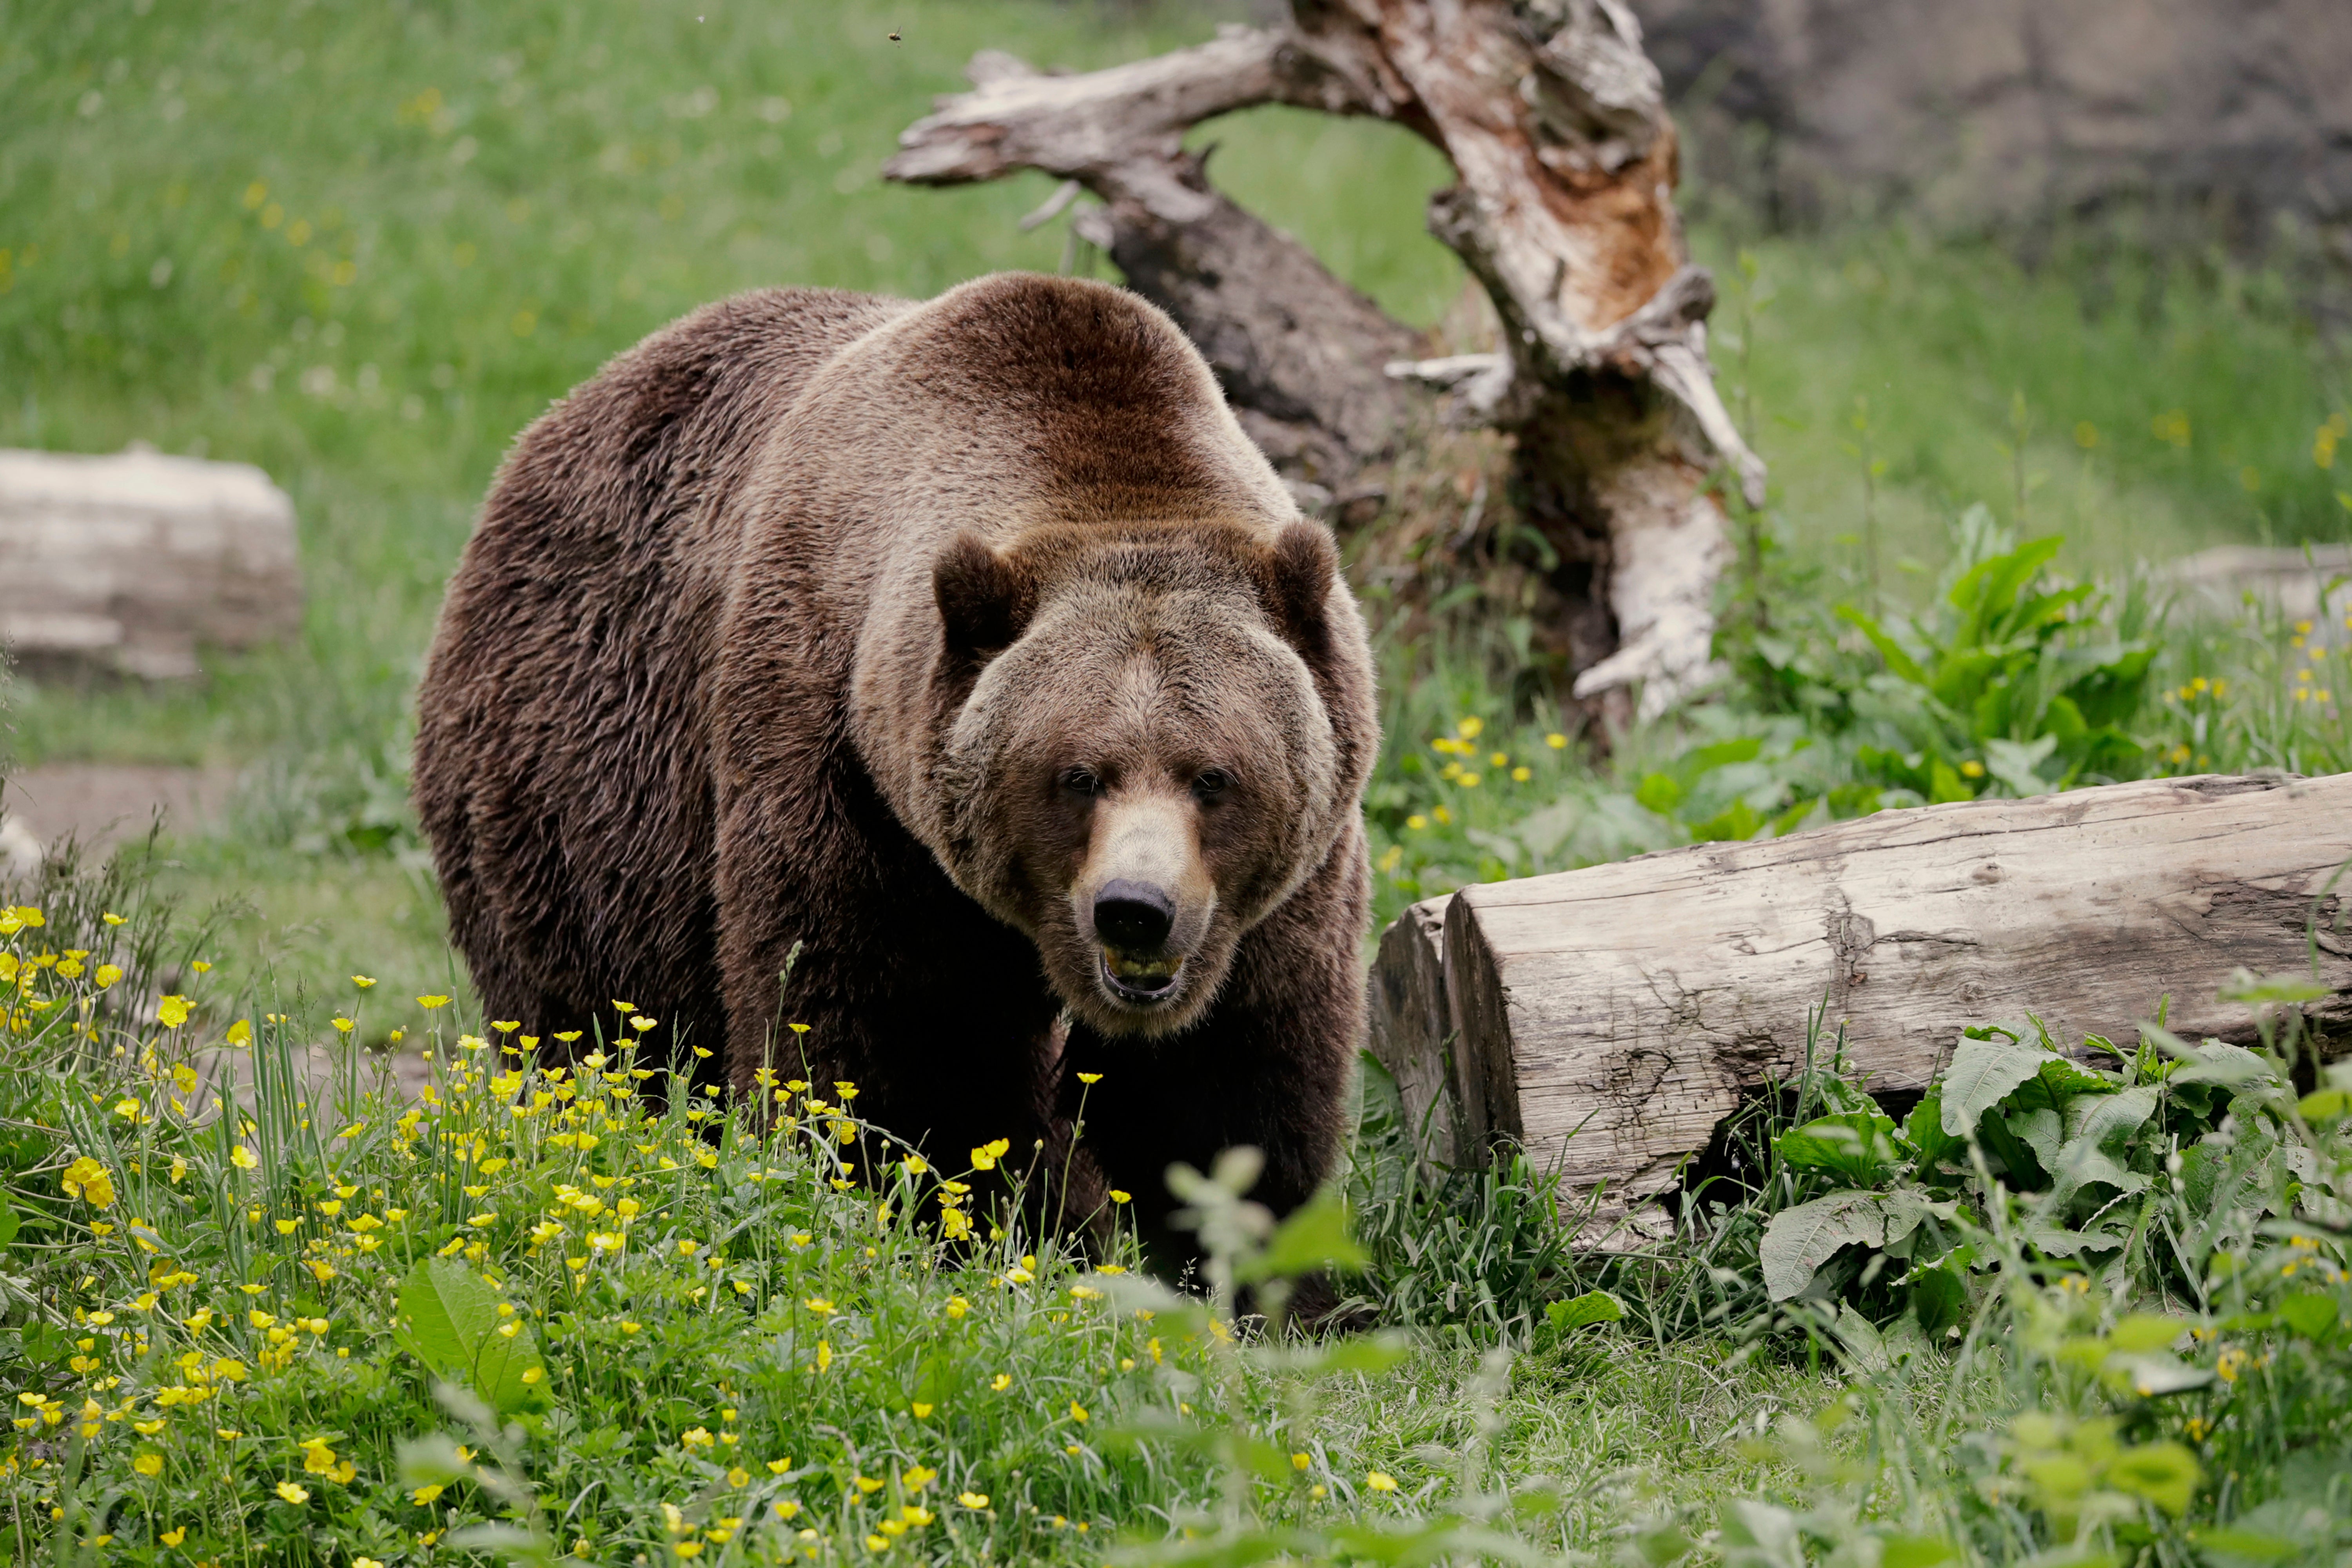 Grizzly bears are set to be reintroduced in the North Cascades, Washington